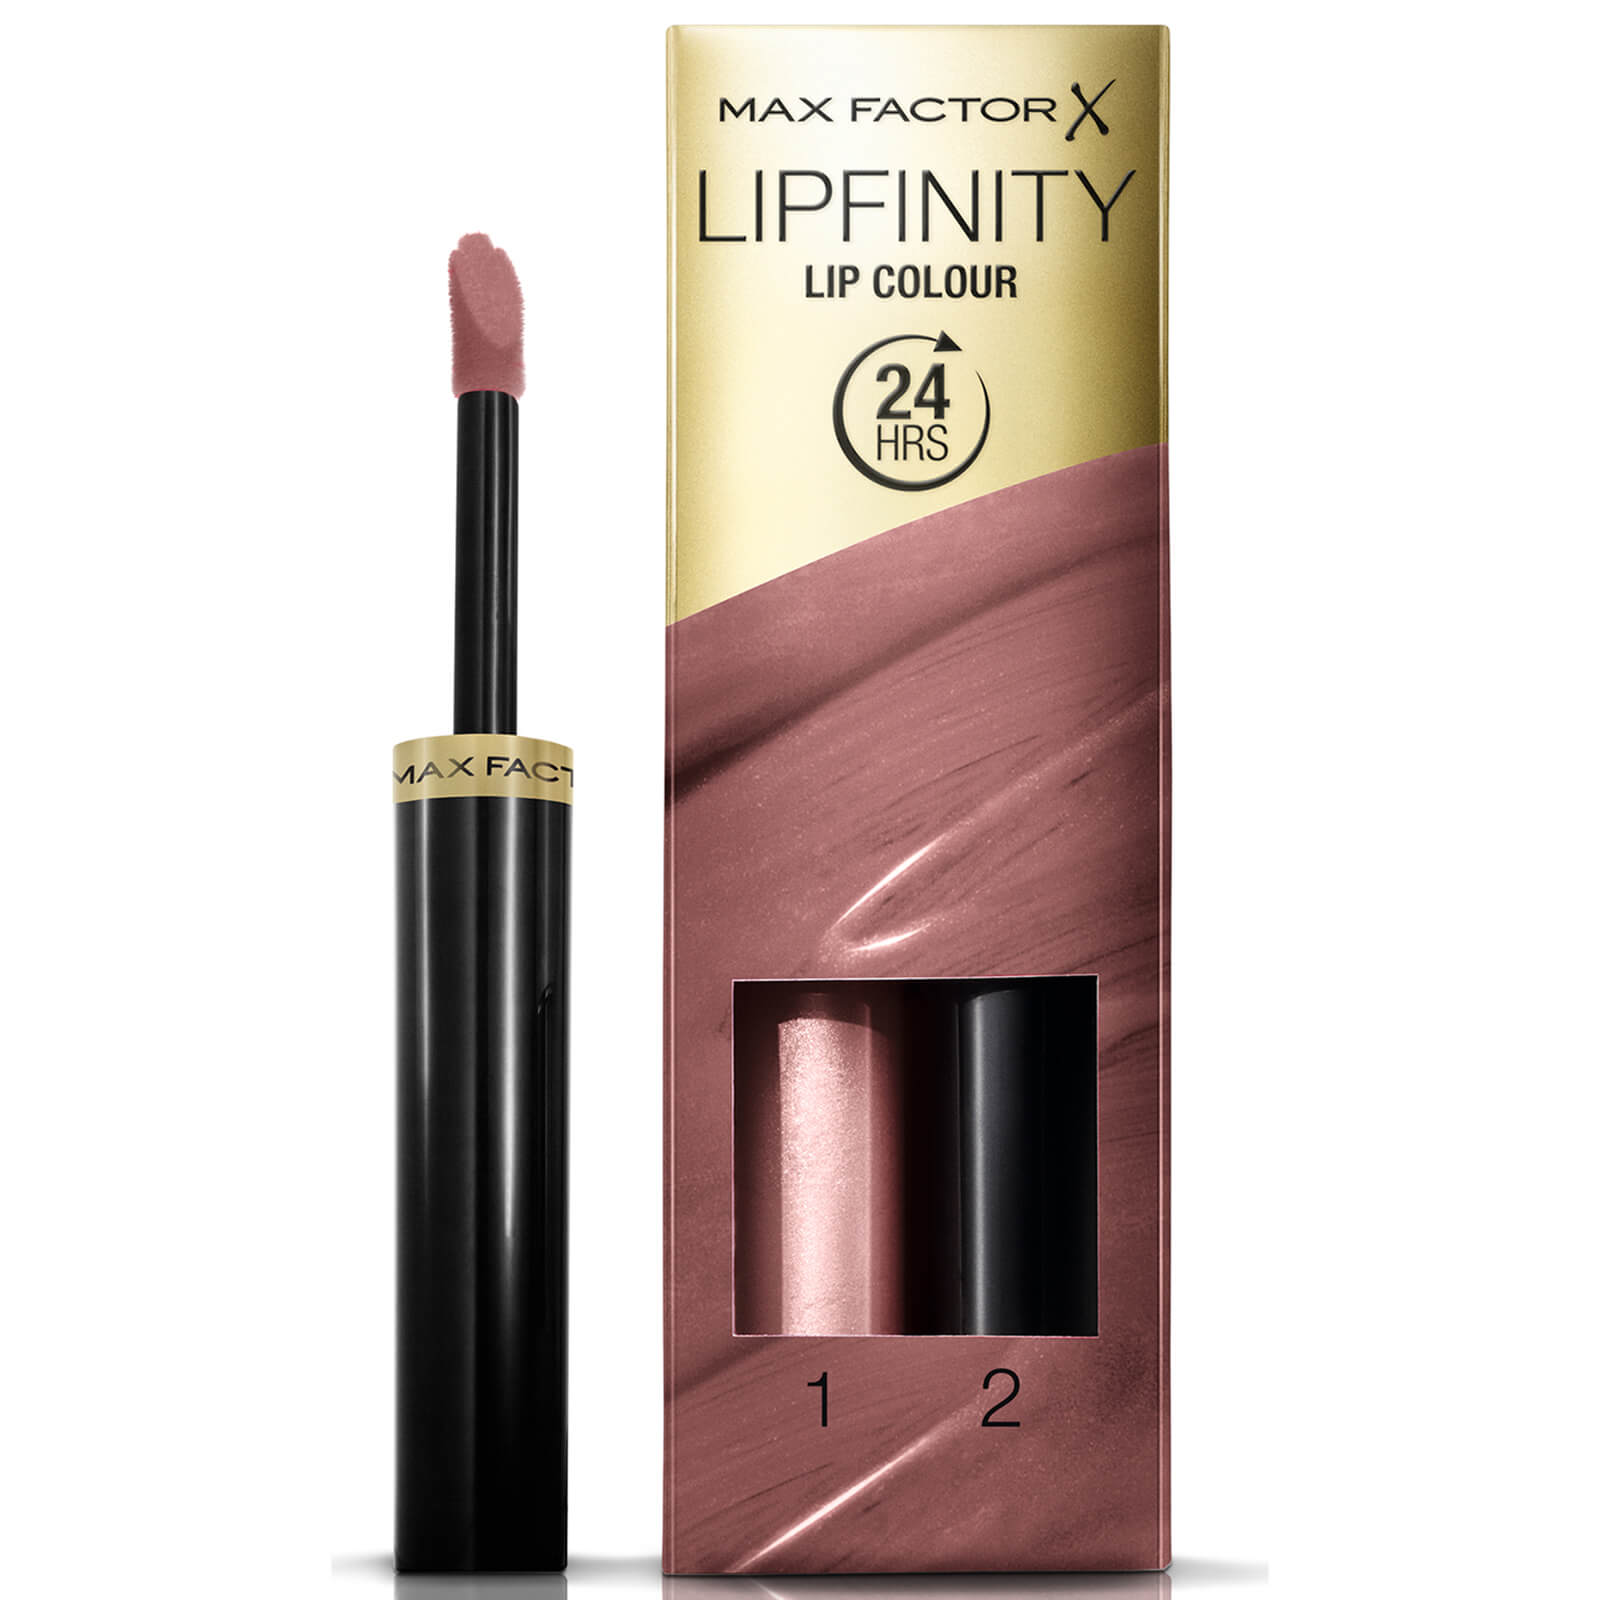 Image of Max Factor Lipfinity Lip Color 3.69g - 016 Glowing